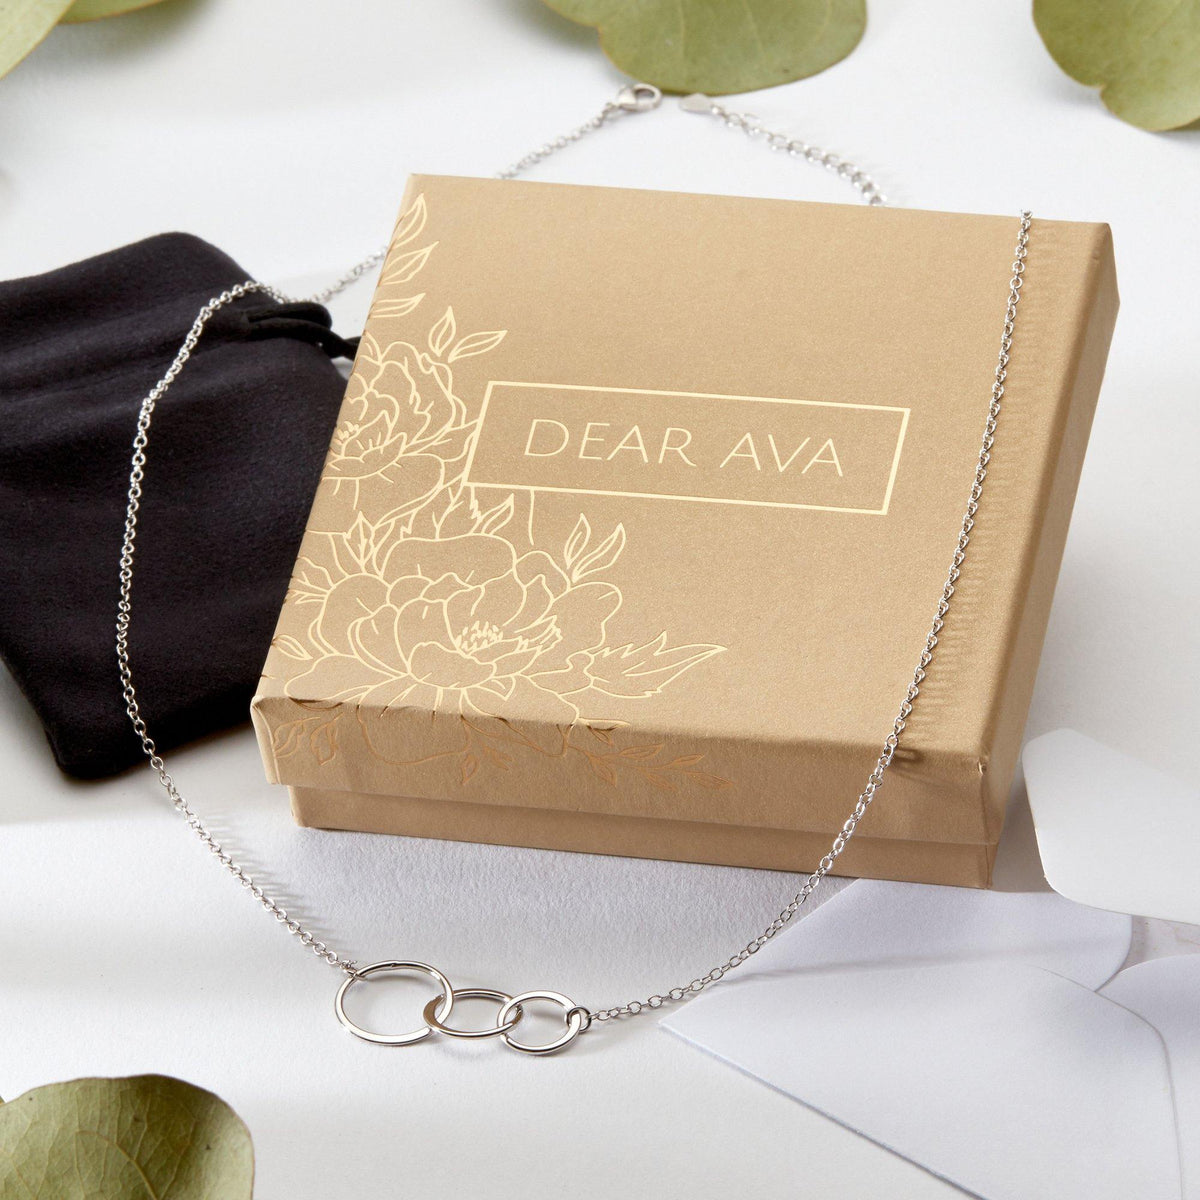 37th Birthday Necklace - Dear Ava, Jewelry / Necklaces / Pendants